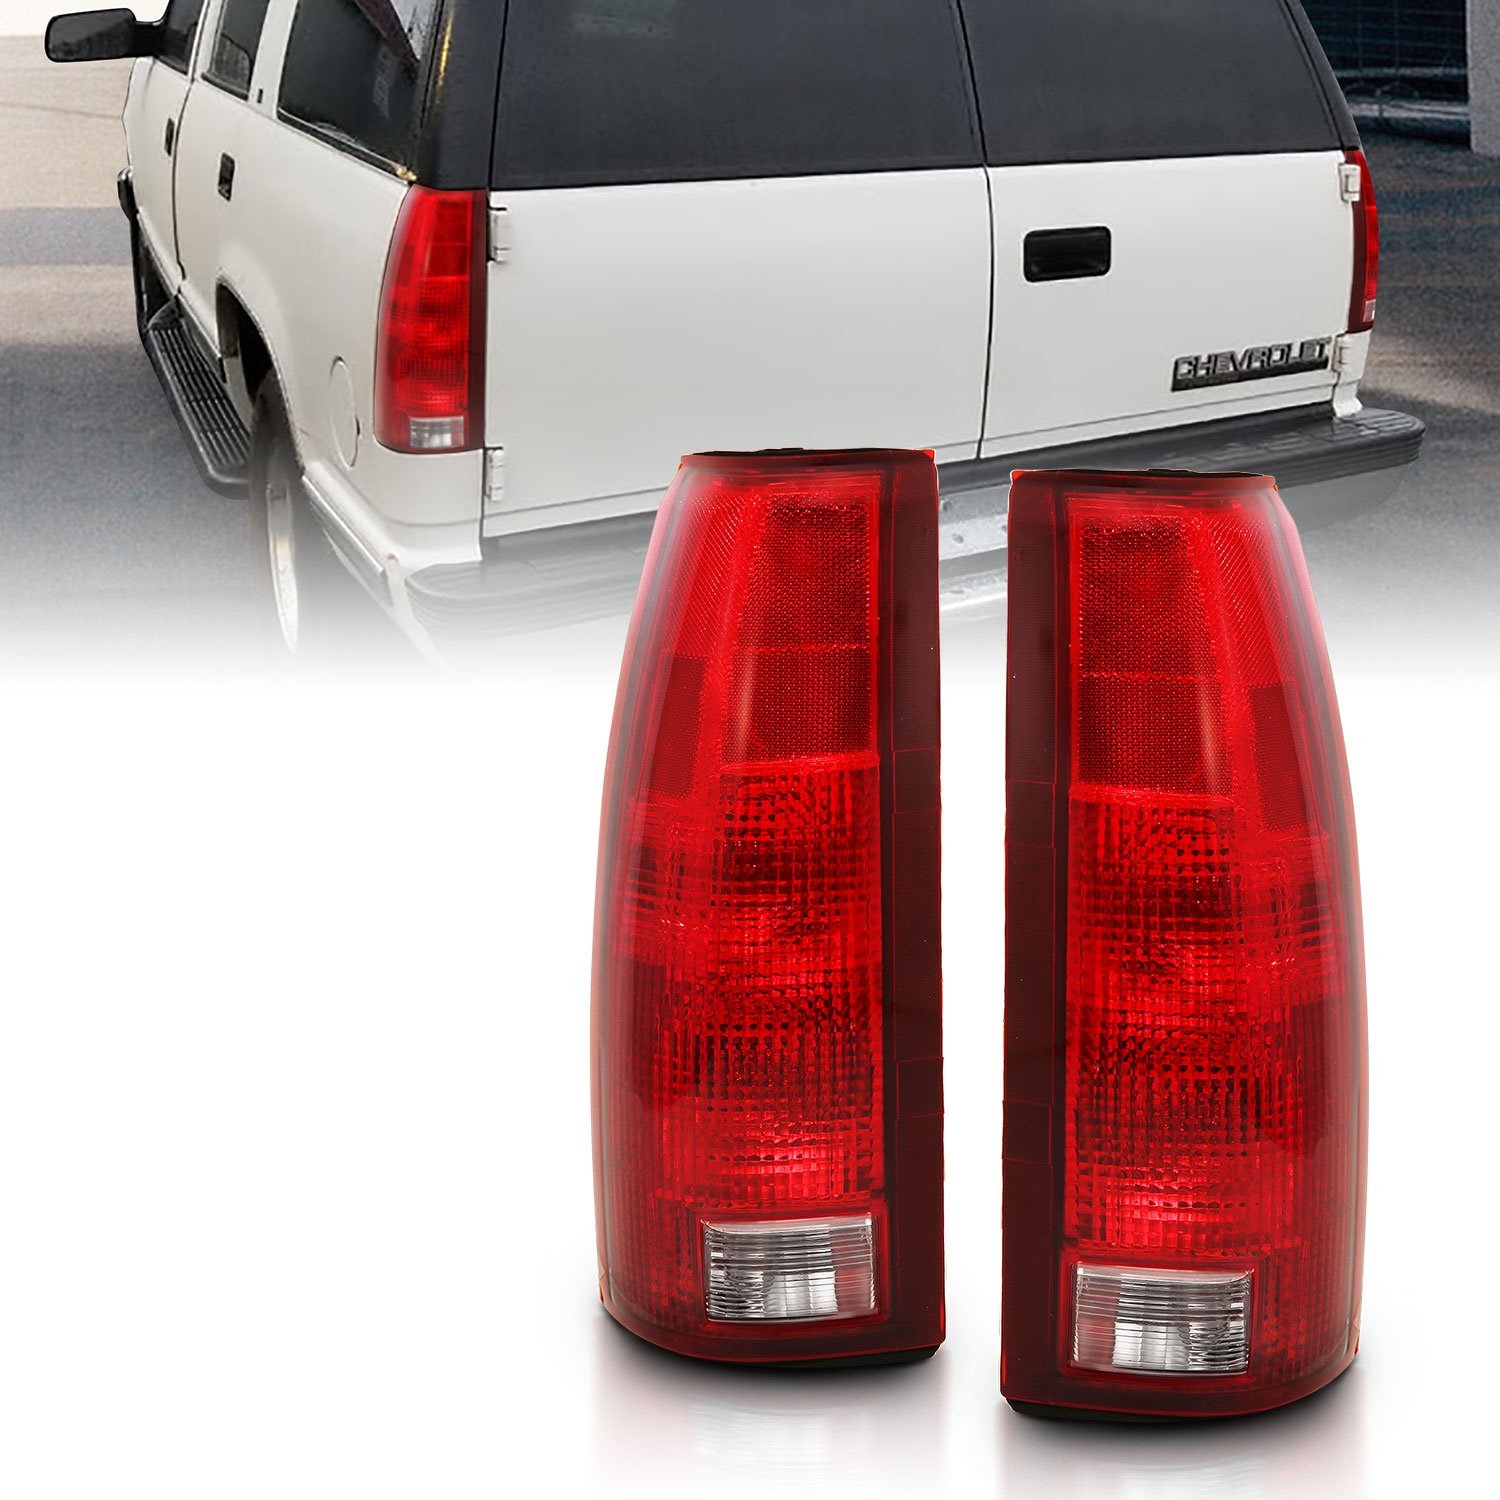 311300 OE-Style Incandescent Taillights Fits Select 1988-2000 GM C/K Trucks, Full-Size SUVs